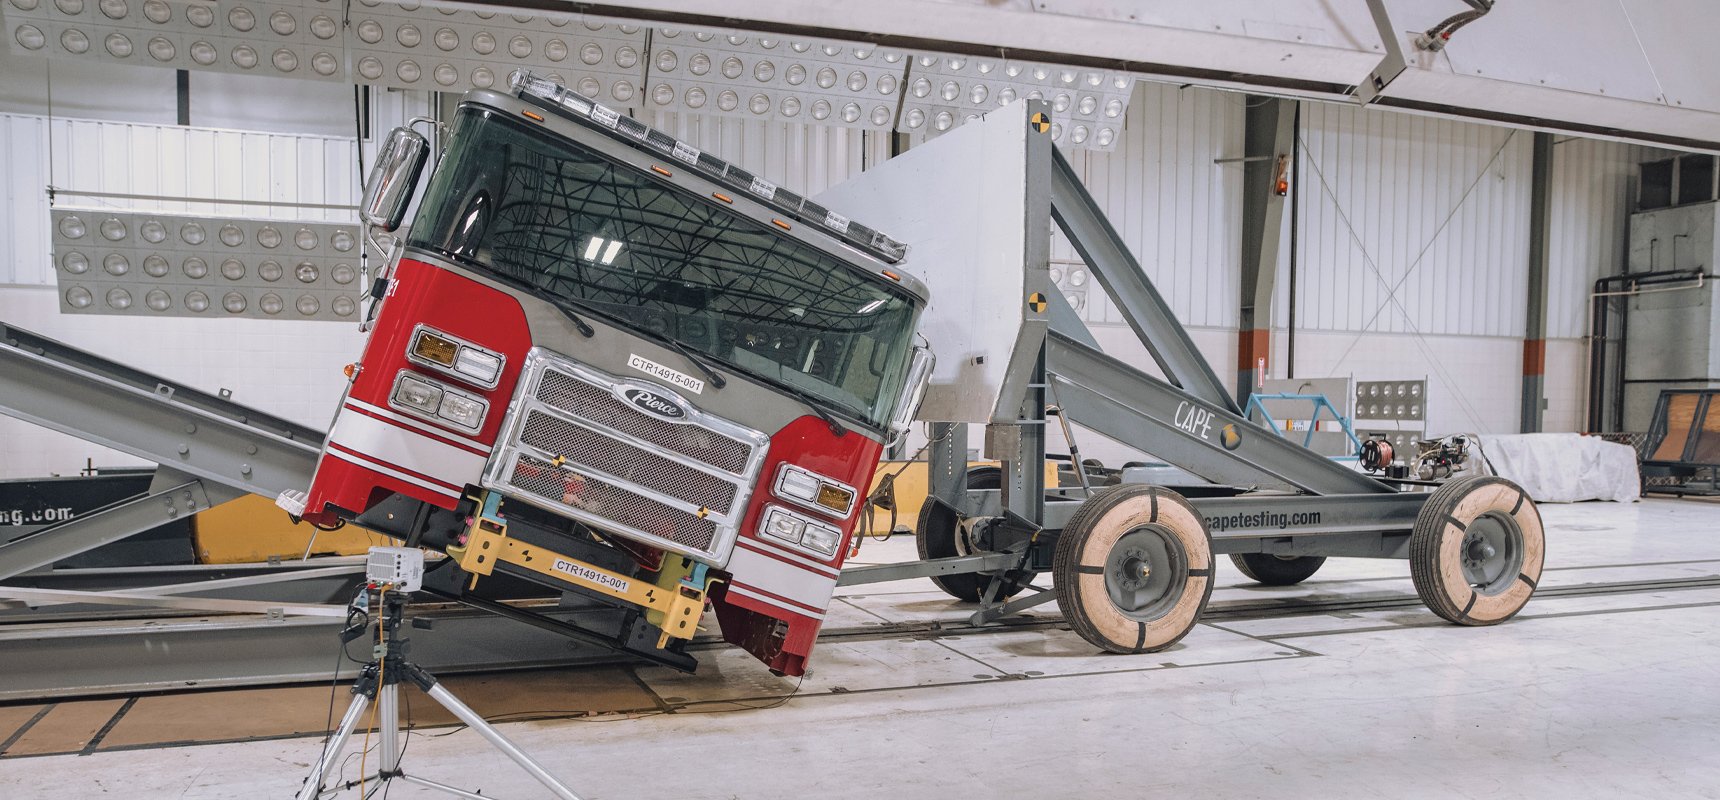 A tilted red Pierce fire truck cab is being hit with a large barrier to simulate a fire truck rollover crash scenario in a fire truck cab crash testing facility.